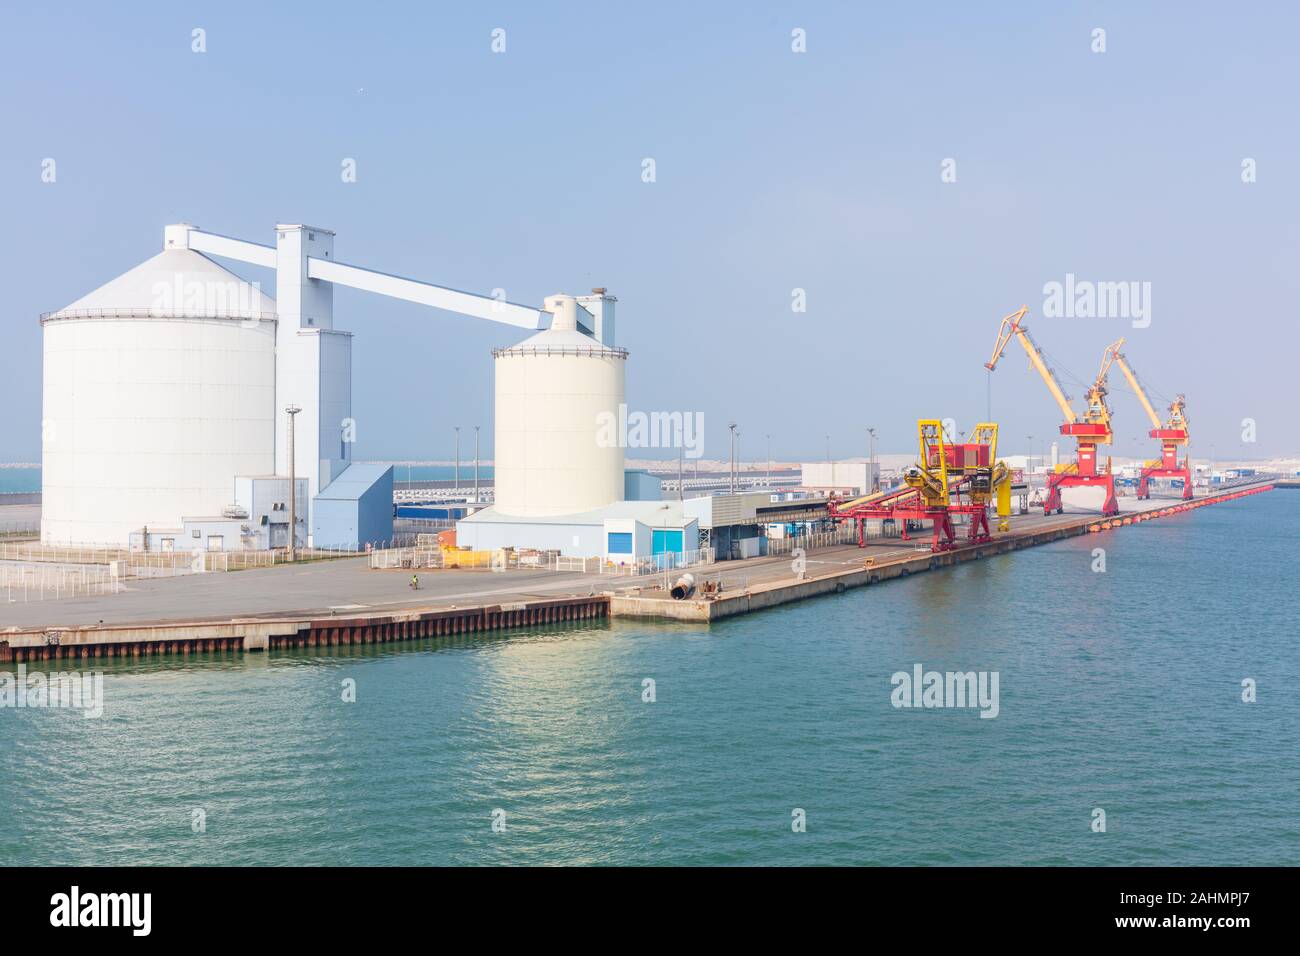 Calais, France; 20th May 2018; Storage Tanks and Brightly Coloured Cranes in the Port Stock Photo